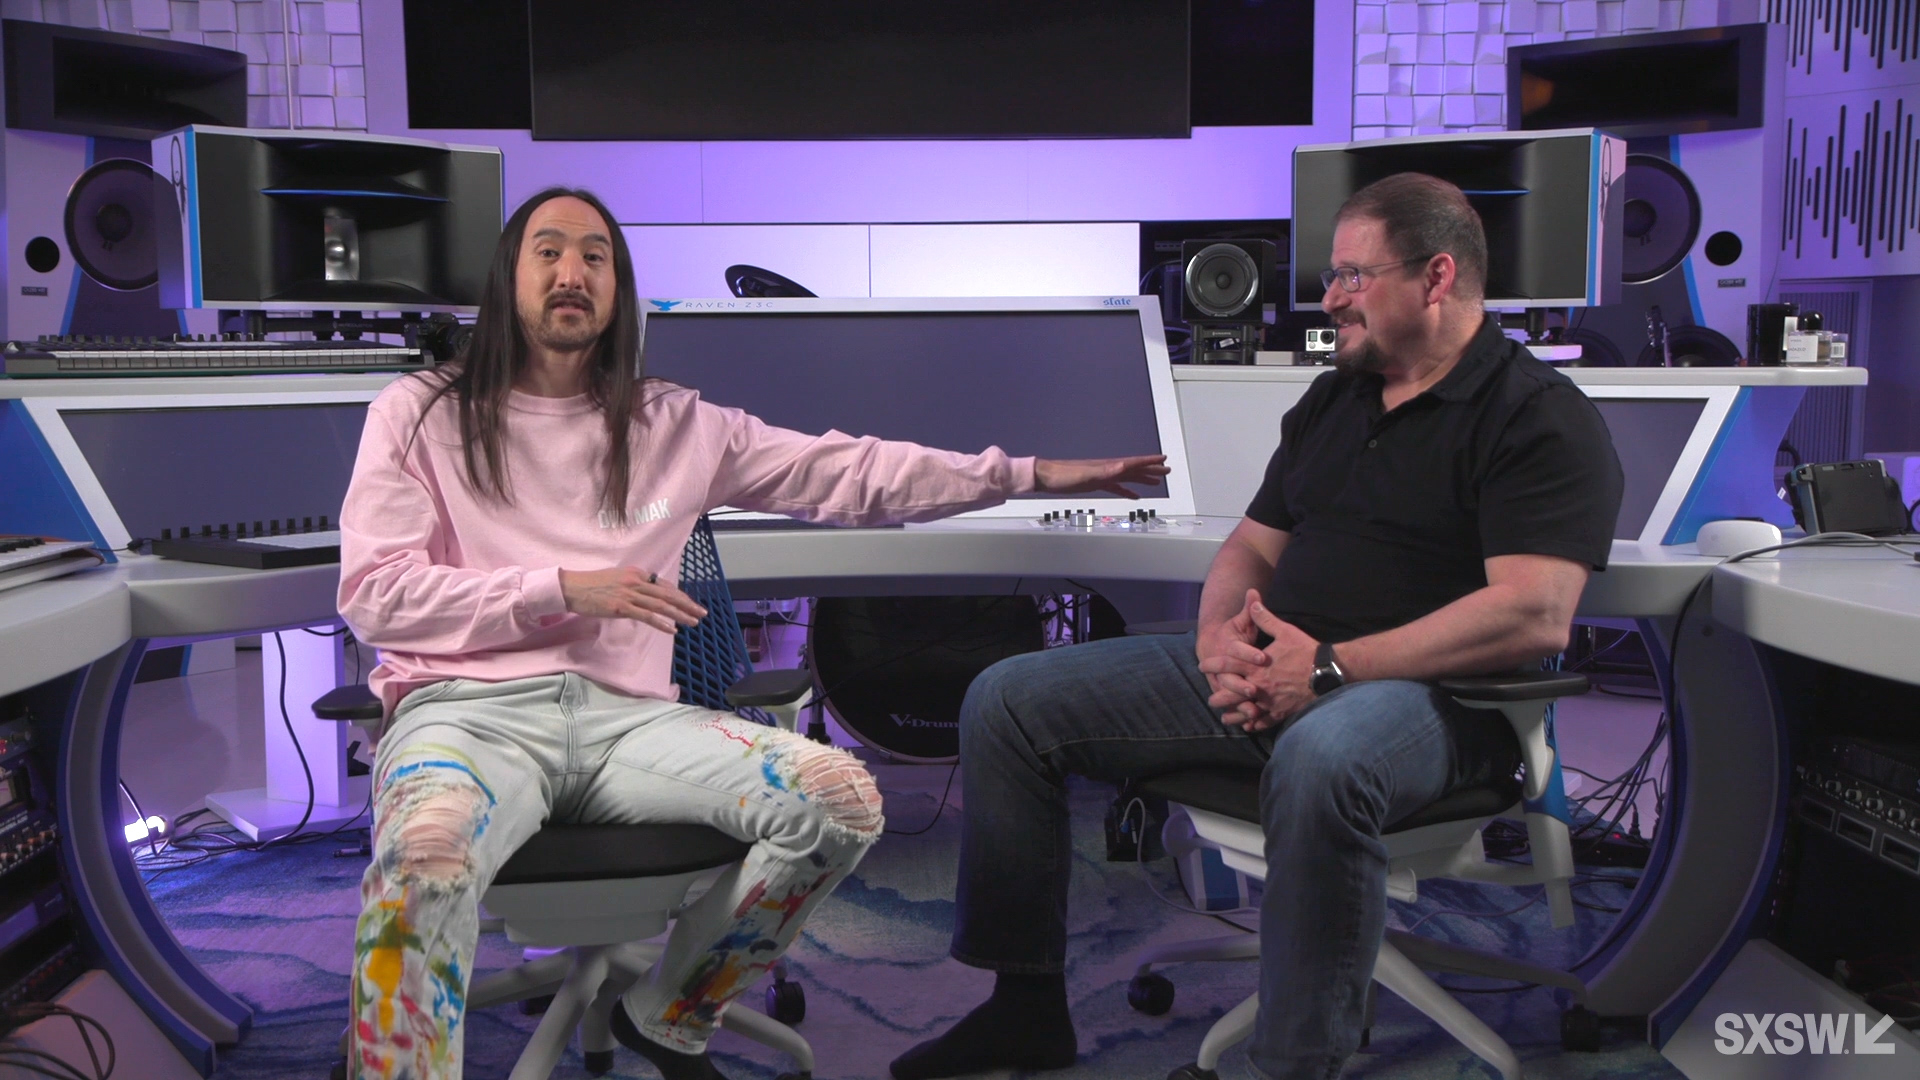 Cristiano Amon and Steve Aoki speak at the featured session “Can 5G Transform the Live Music Experience?” during SXSW Online on March 18, 2021.